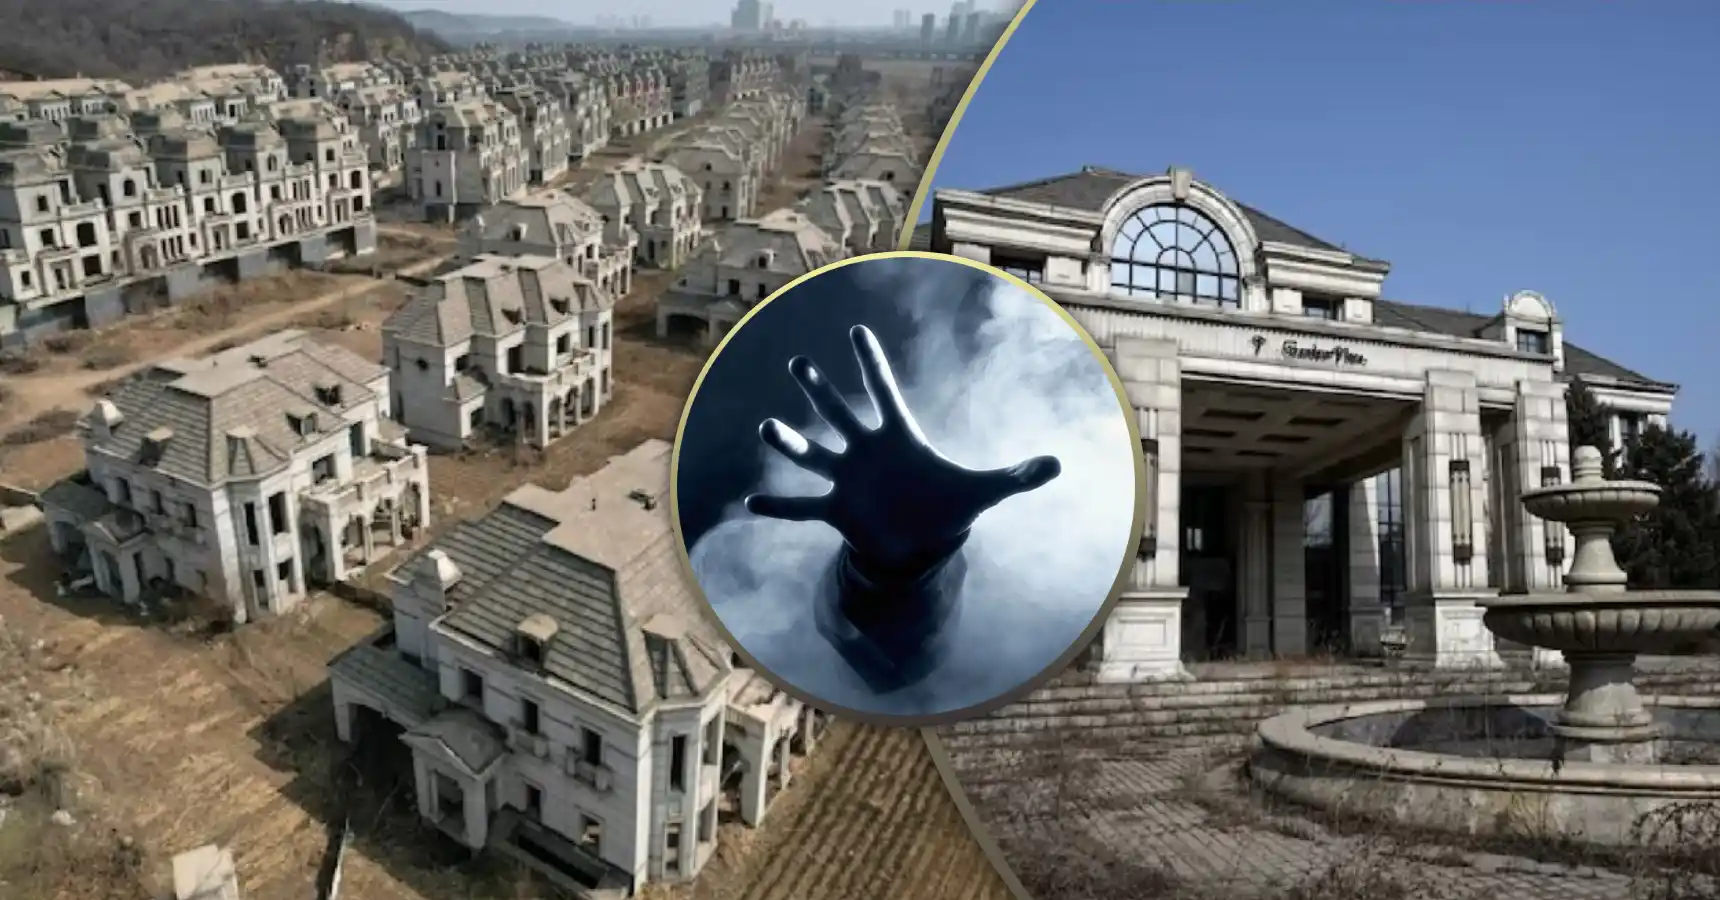 Just like a haunted house! These huge villas of China are standing with acre after acre of land